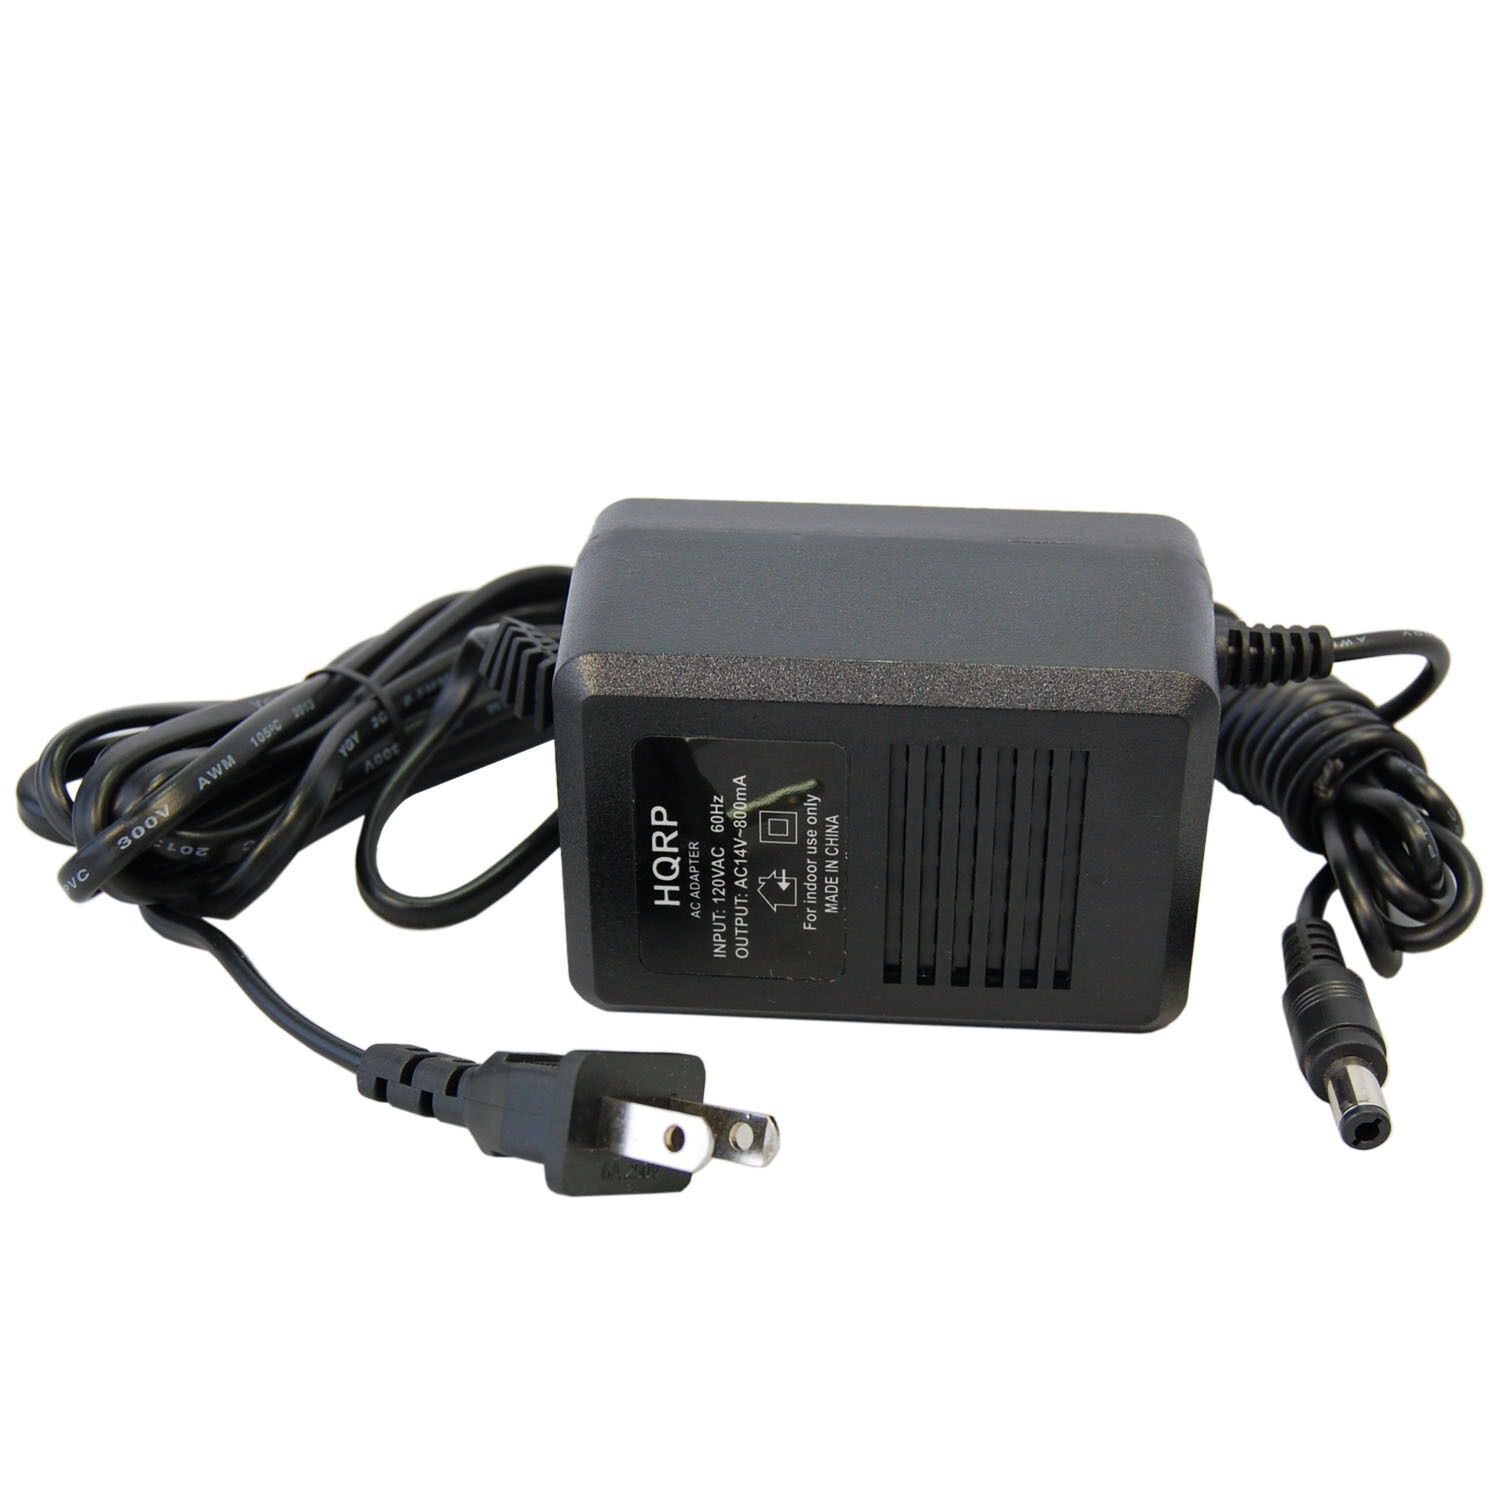 AC Adapter Power Supply for Roland BRC-120 GR-33 GR-20 AF-70 MPN: 8877767137 Output Current: 800 - Click Image to Close